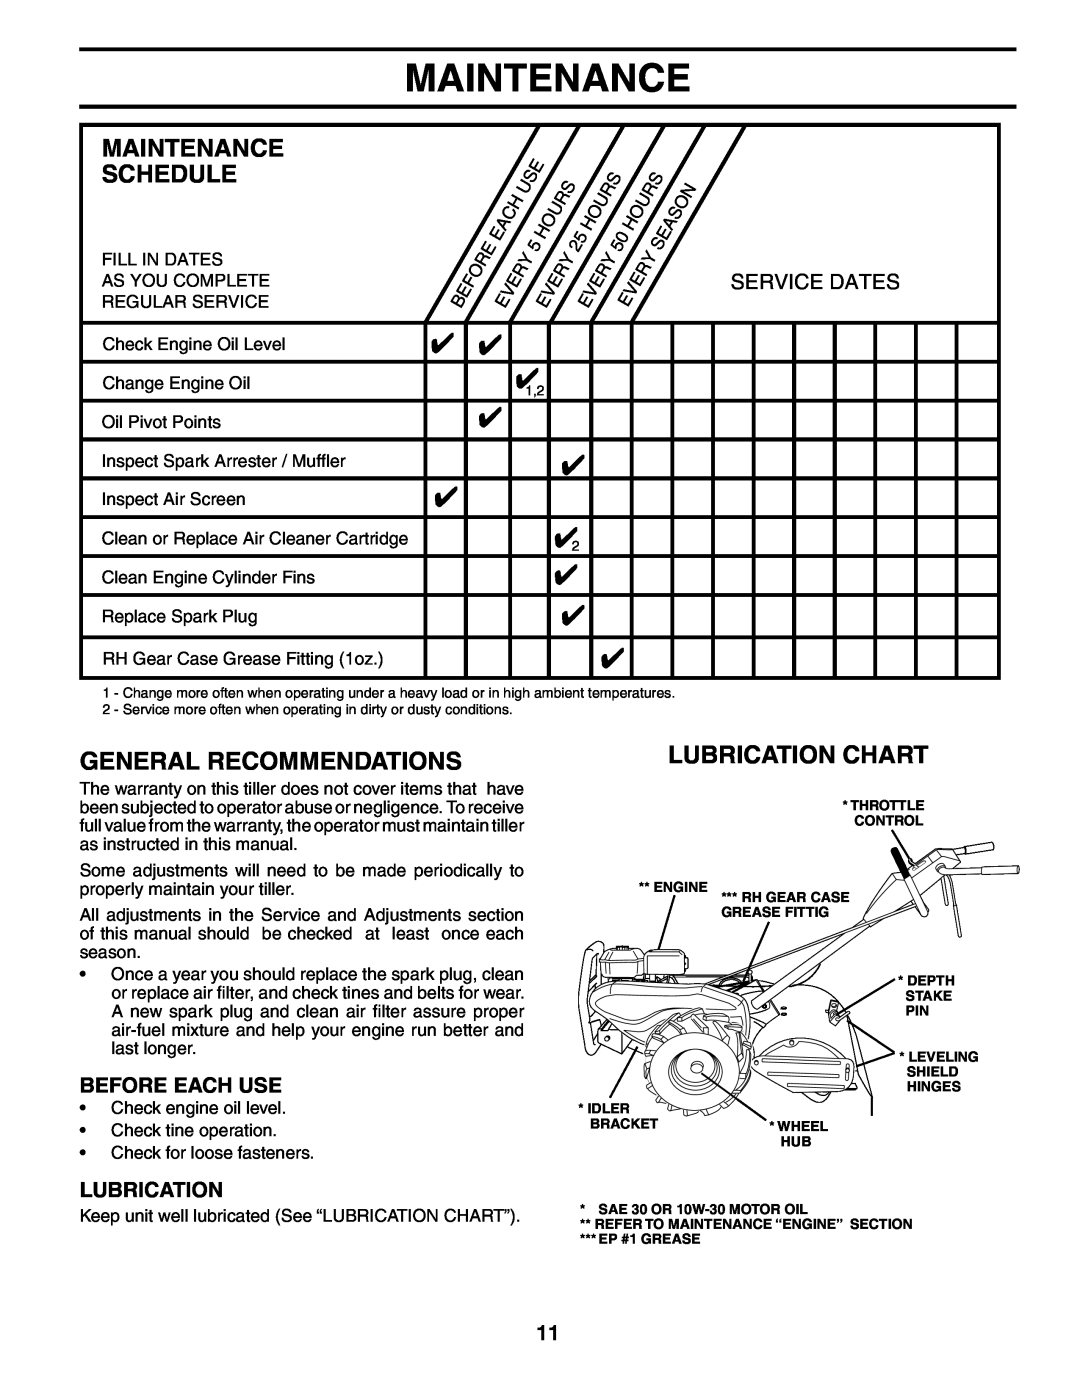 Poulan PRRT65B Maintenance Schedule, General Recommendations, Lubrication Chart, Before Each Use, Service Dates 